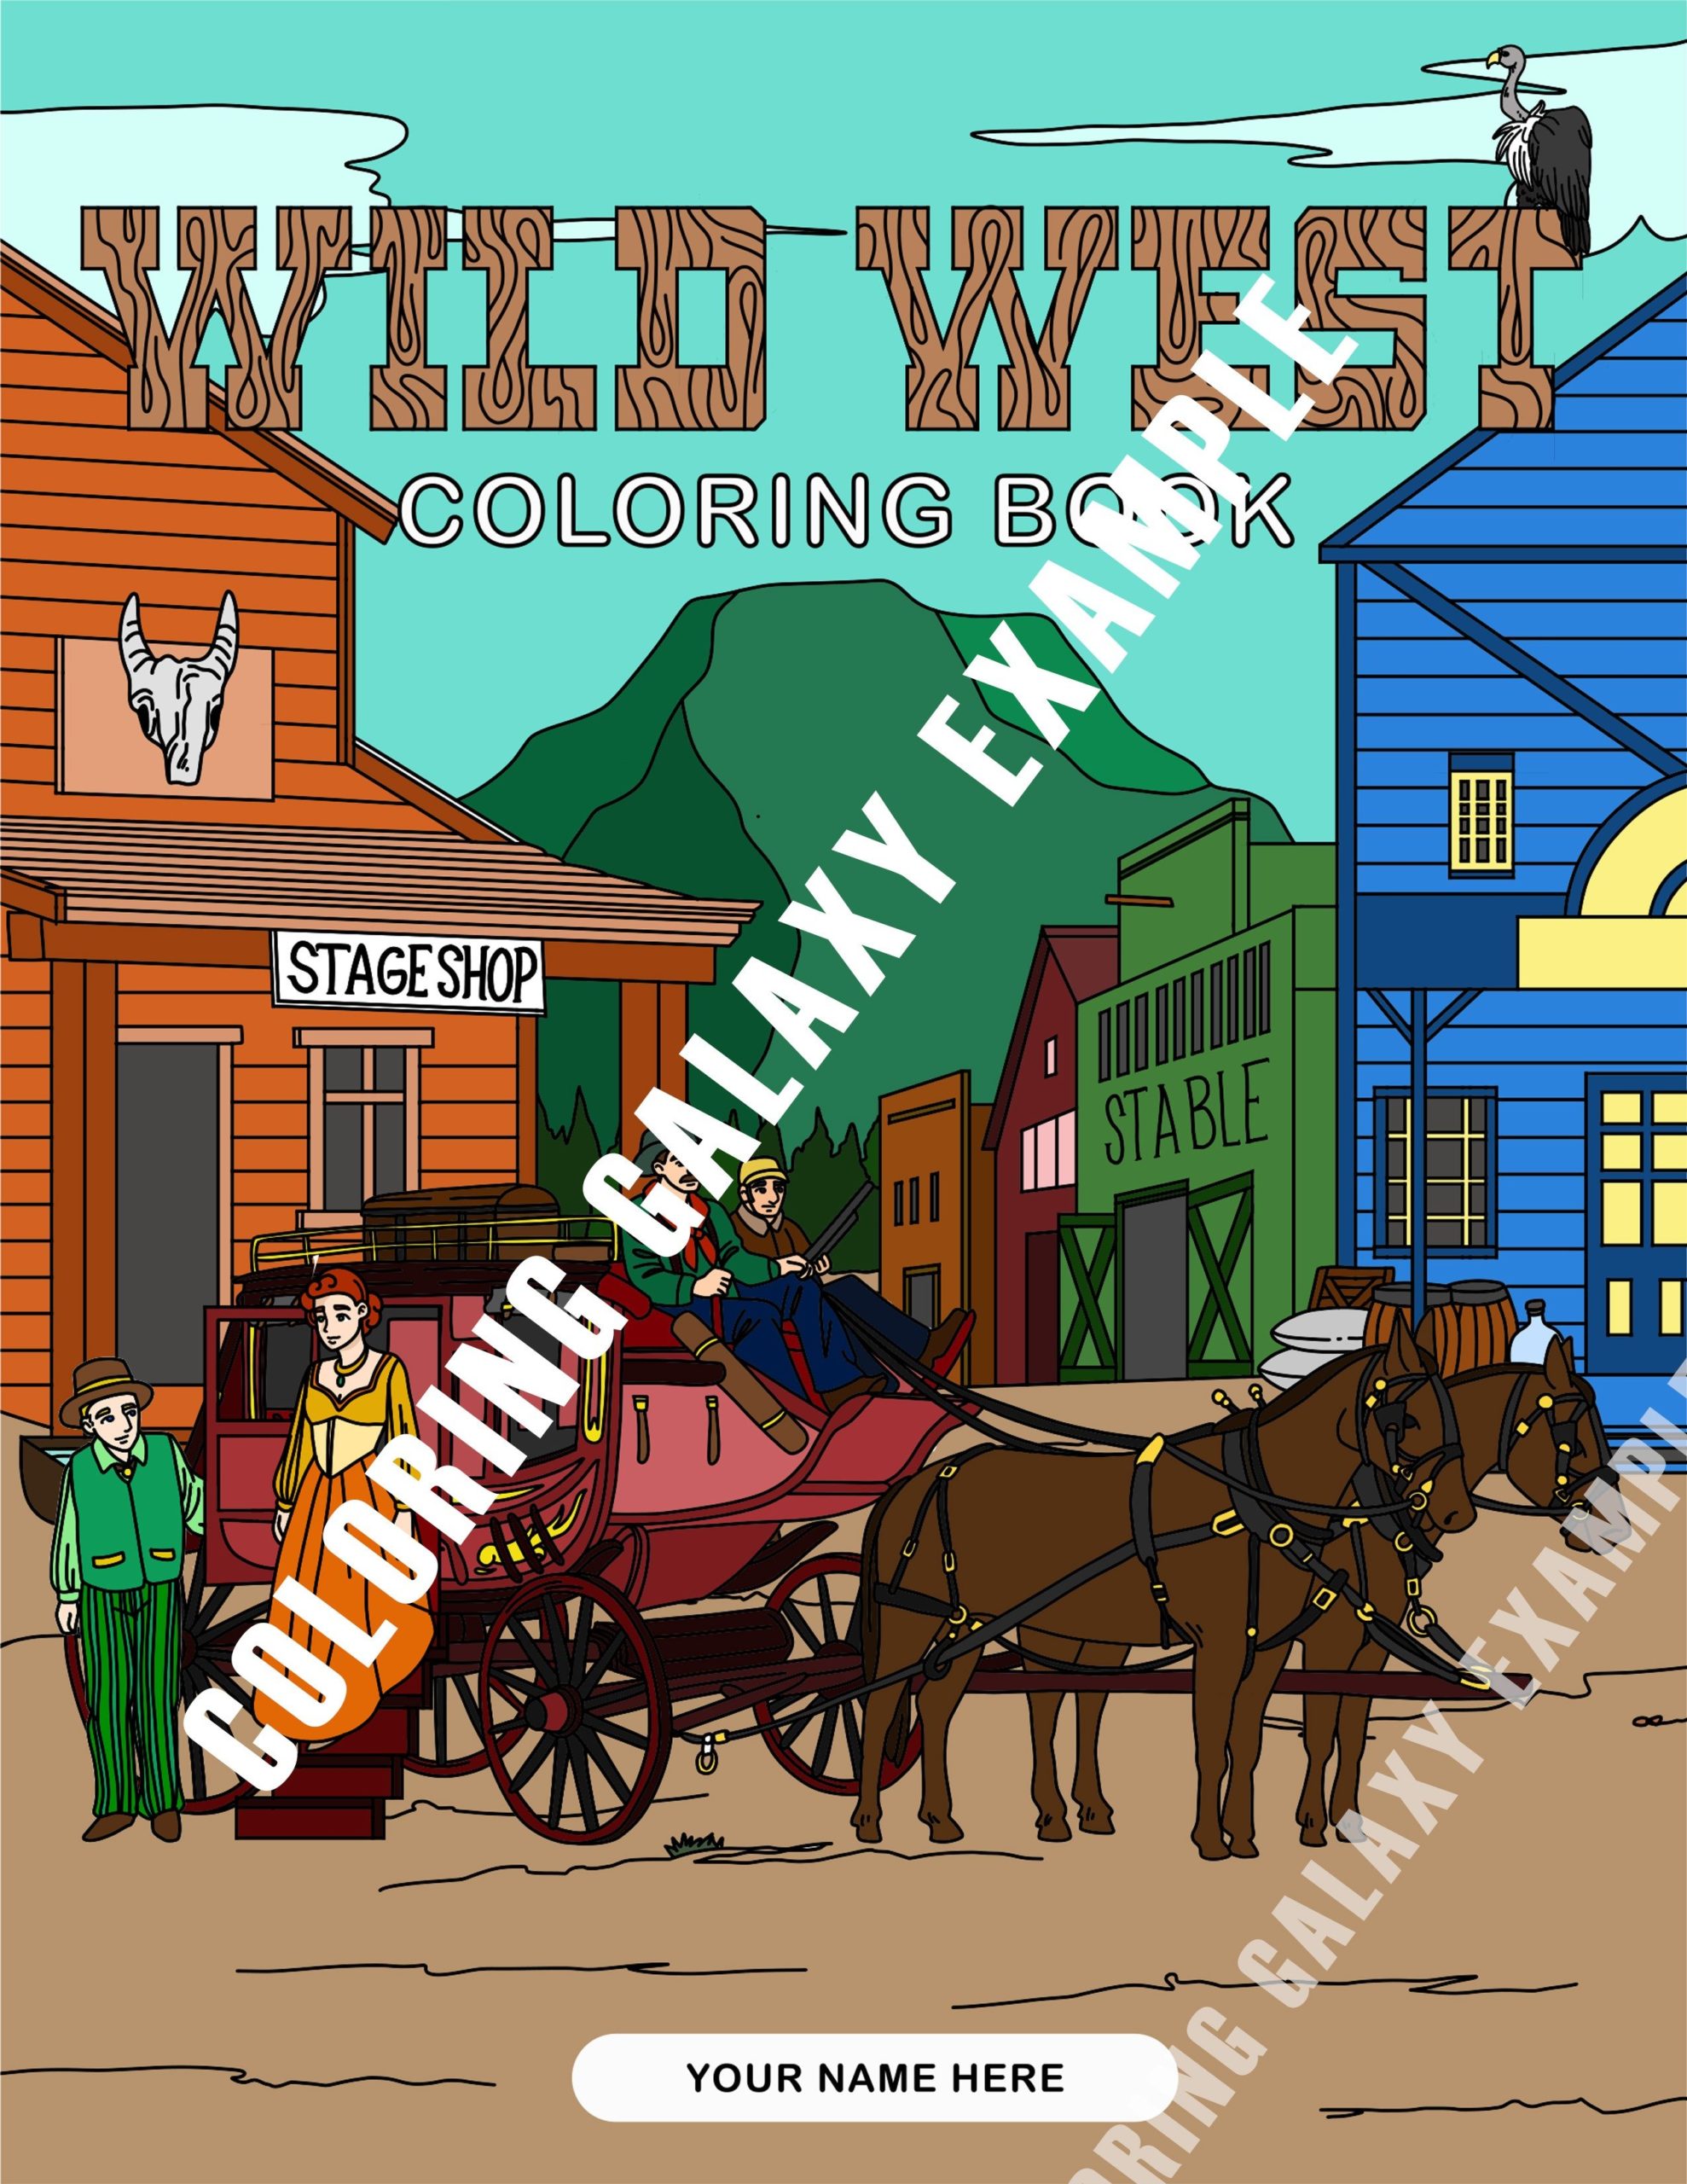 WILD WEST FRONT COVER